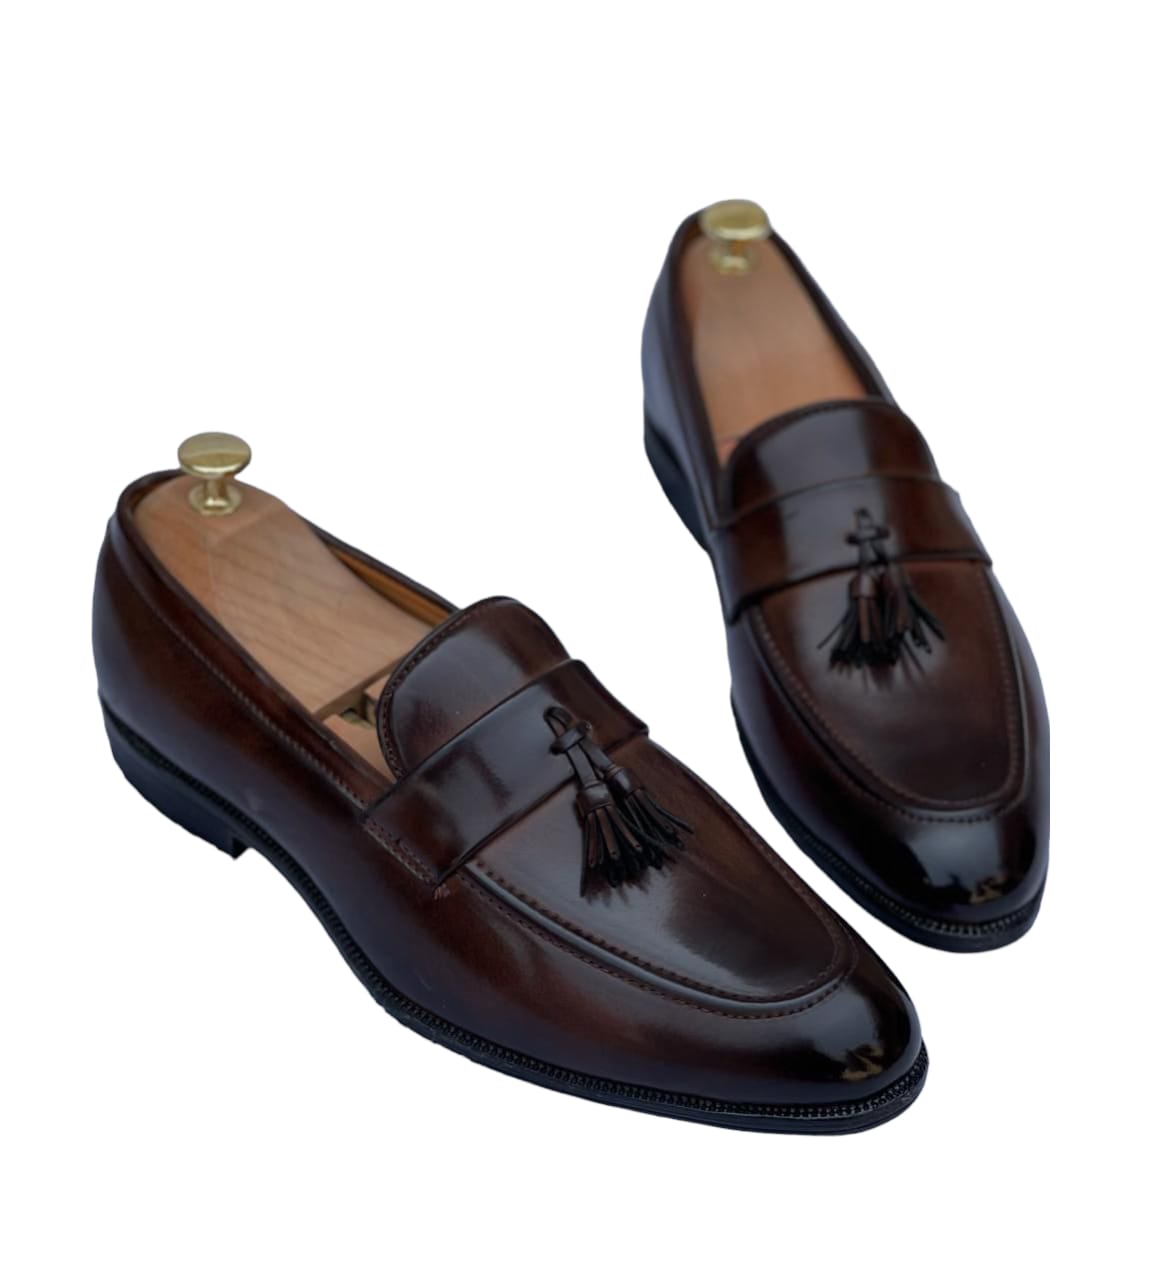 Buy New Business Loafers For Men Party and Casual Wear - JM